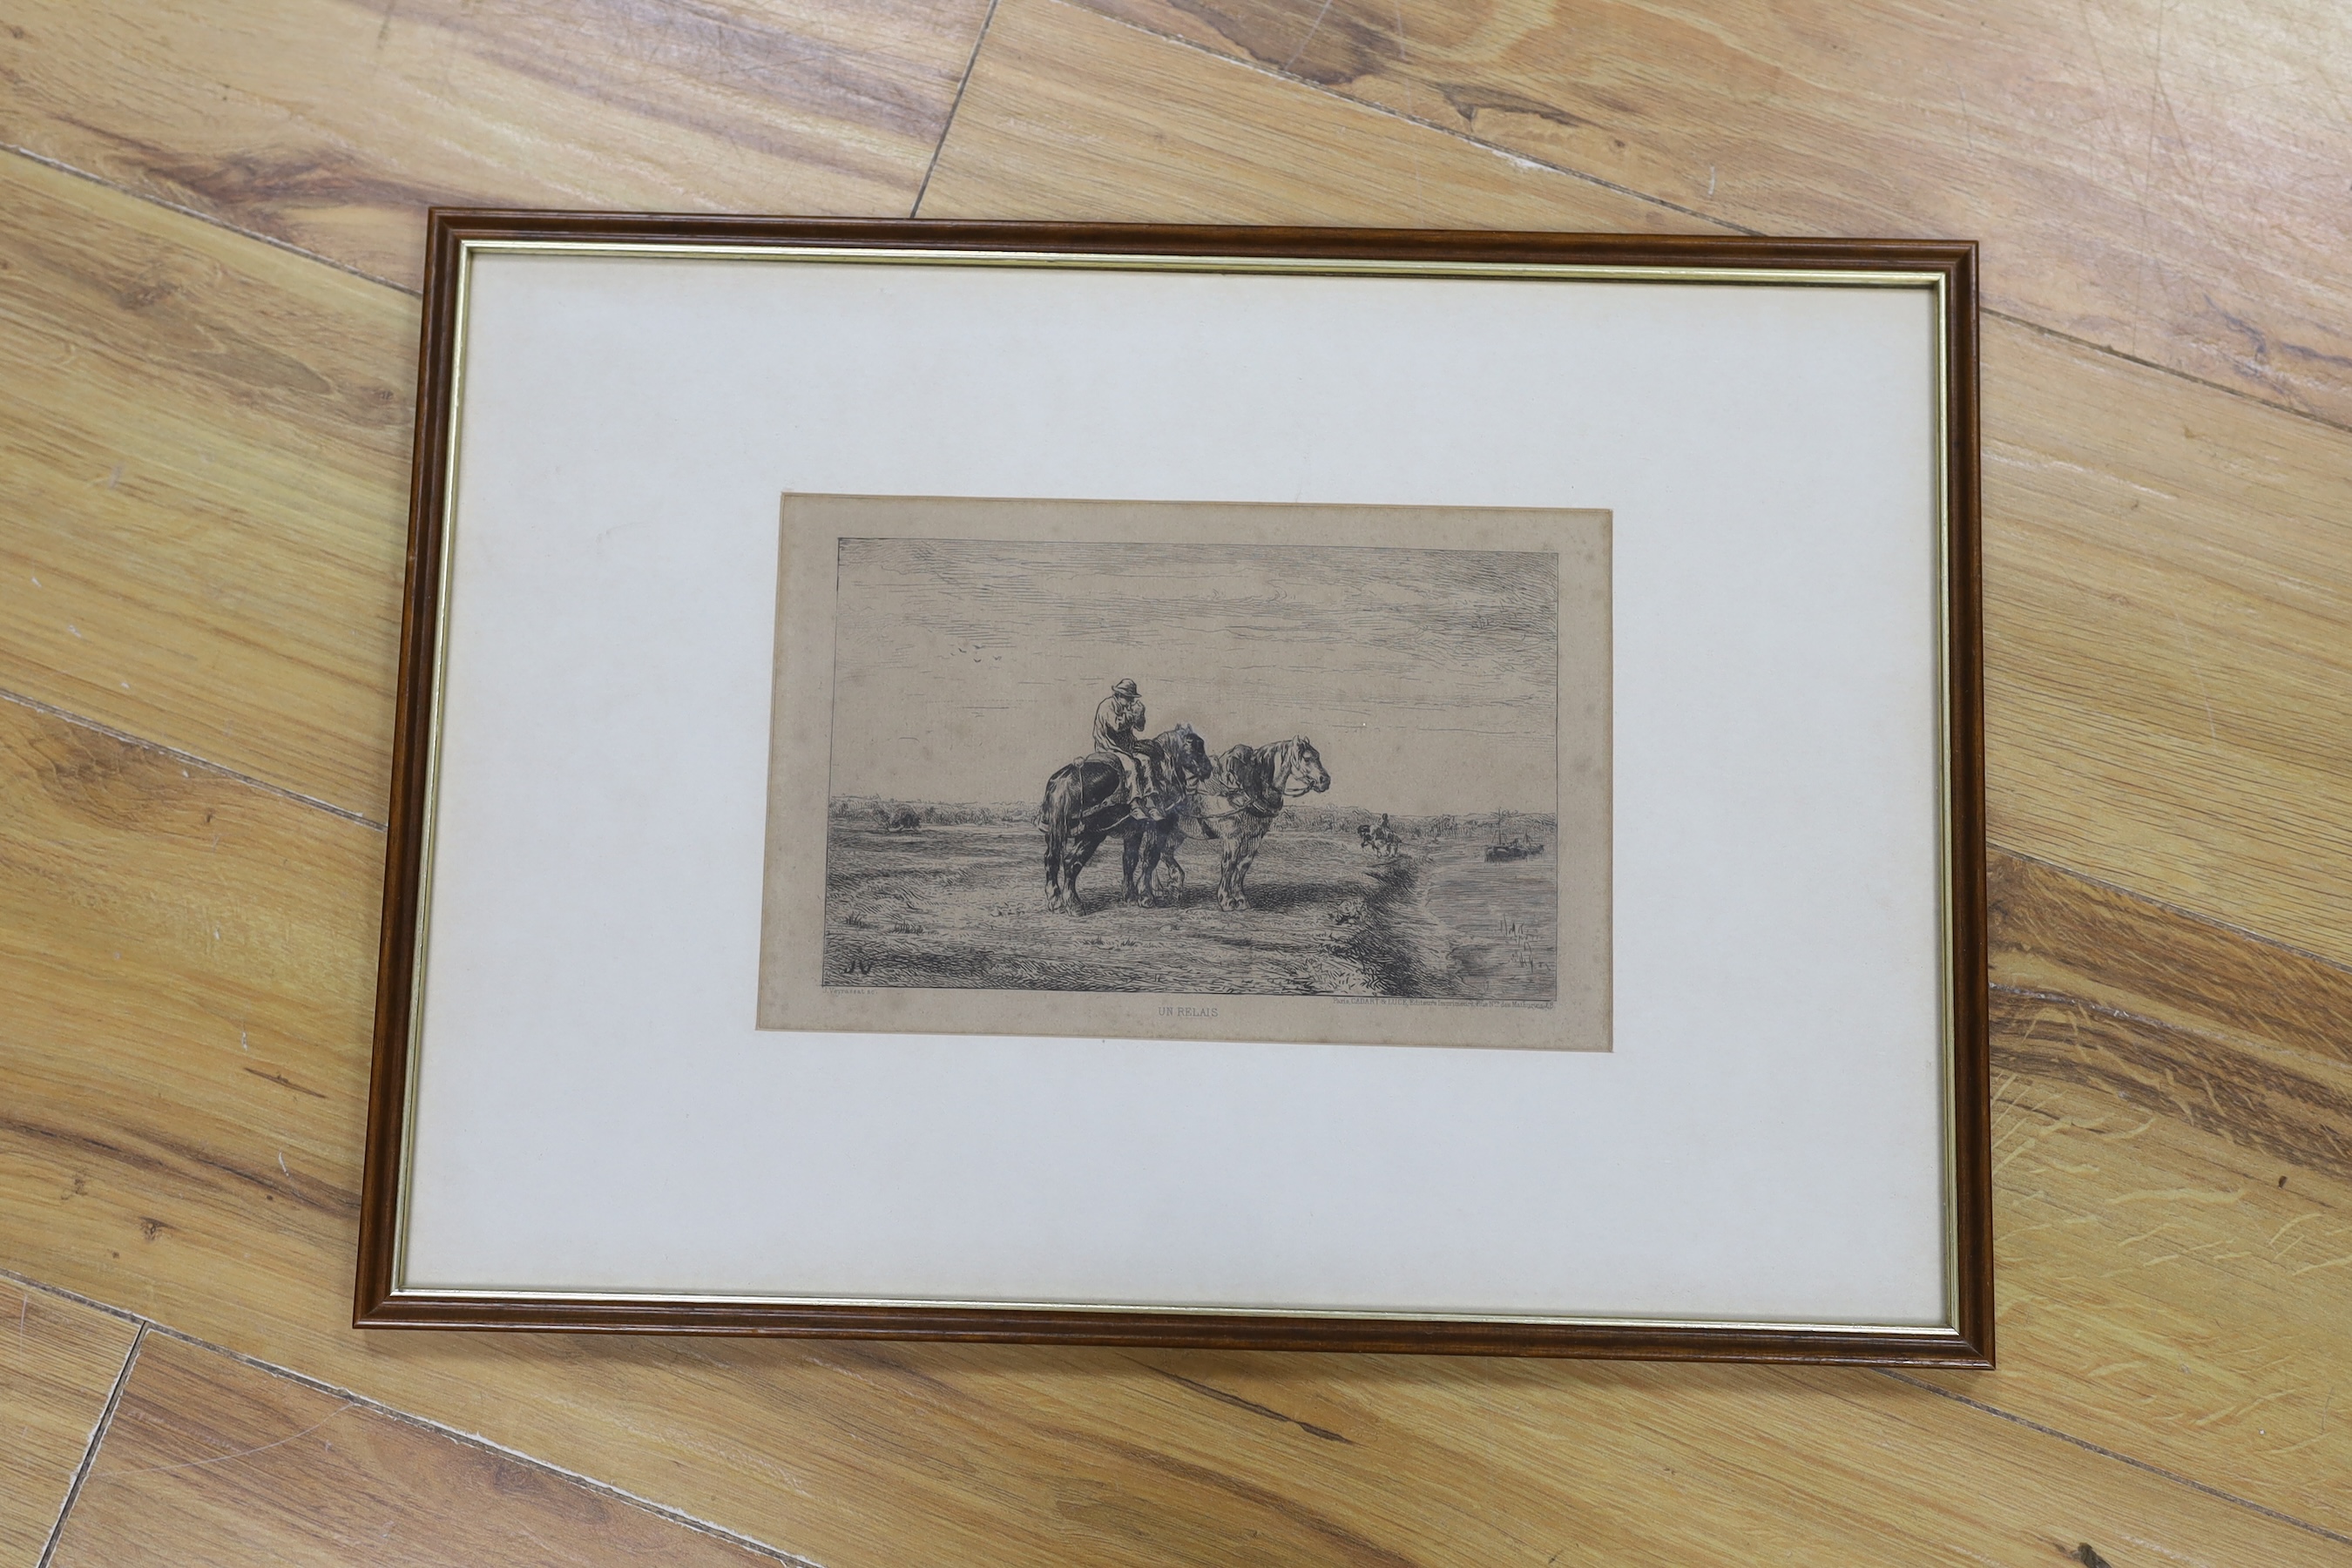 J. Veyrassat after Rosa Bonheur (French, 1822-1899), drypoint etching, 'Un Relais', figure with two horses, signed in pencil, 13.5 x 22cm. Condition - poor